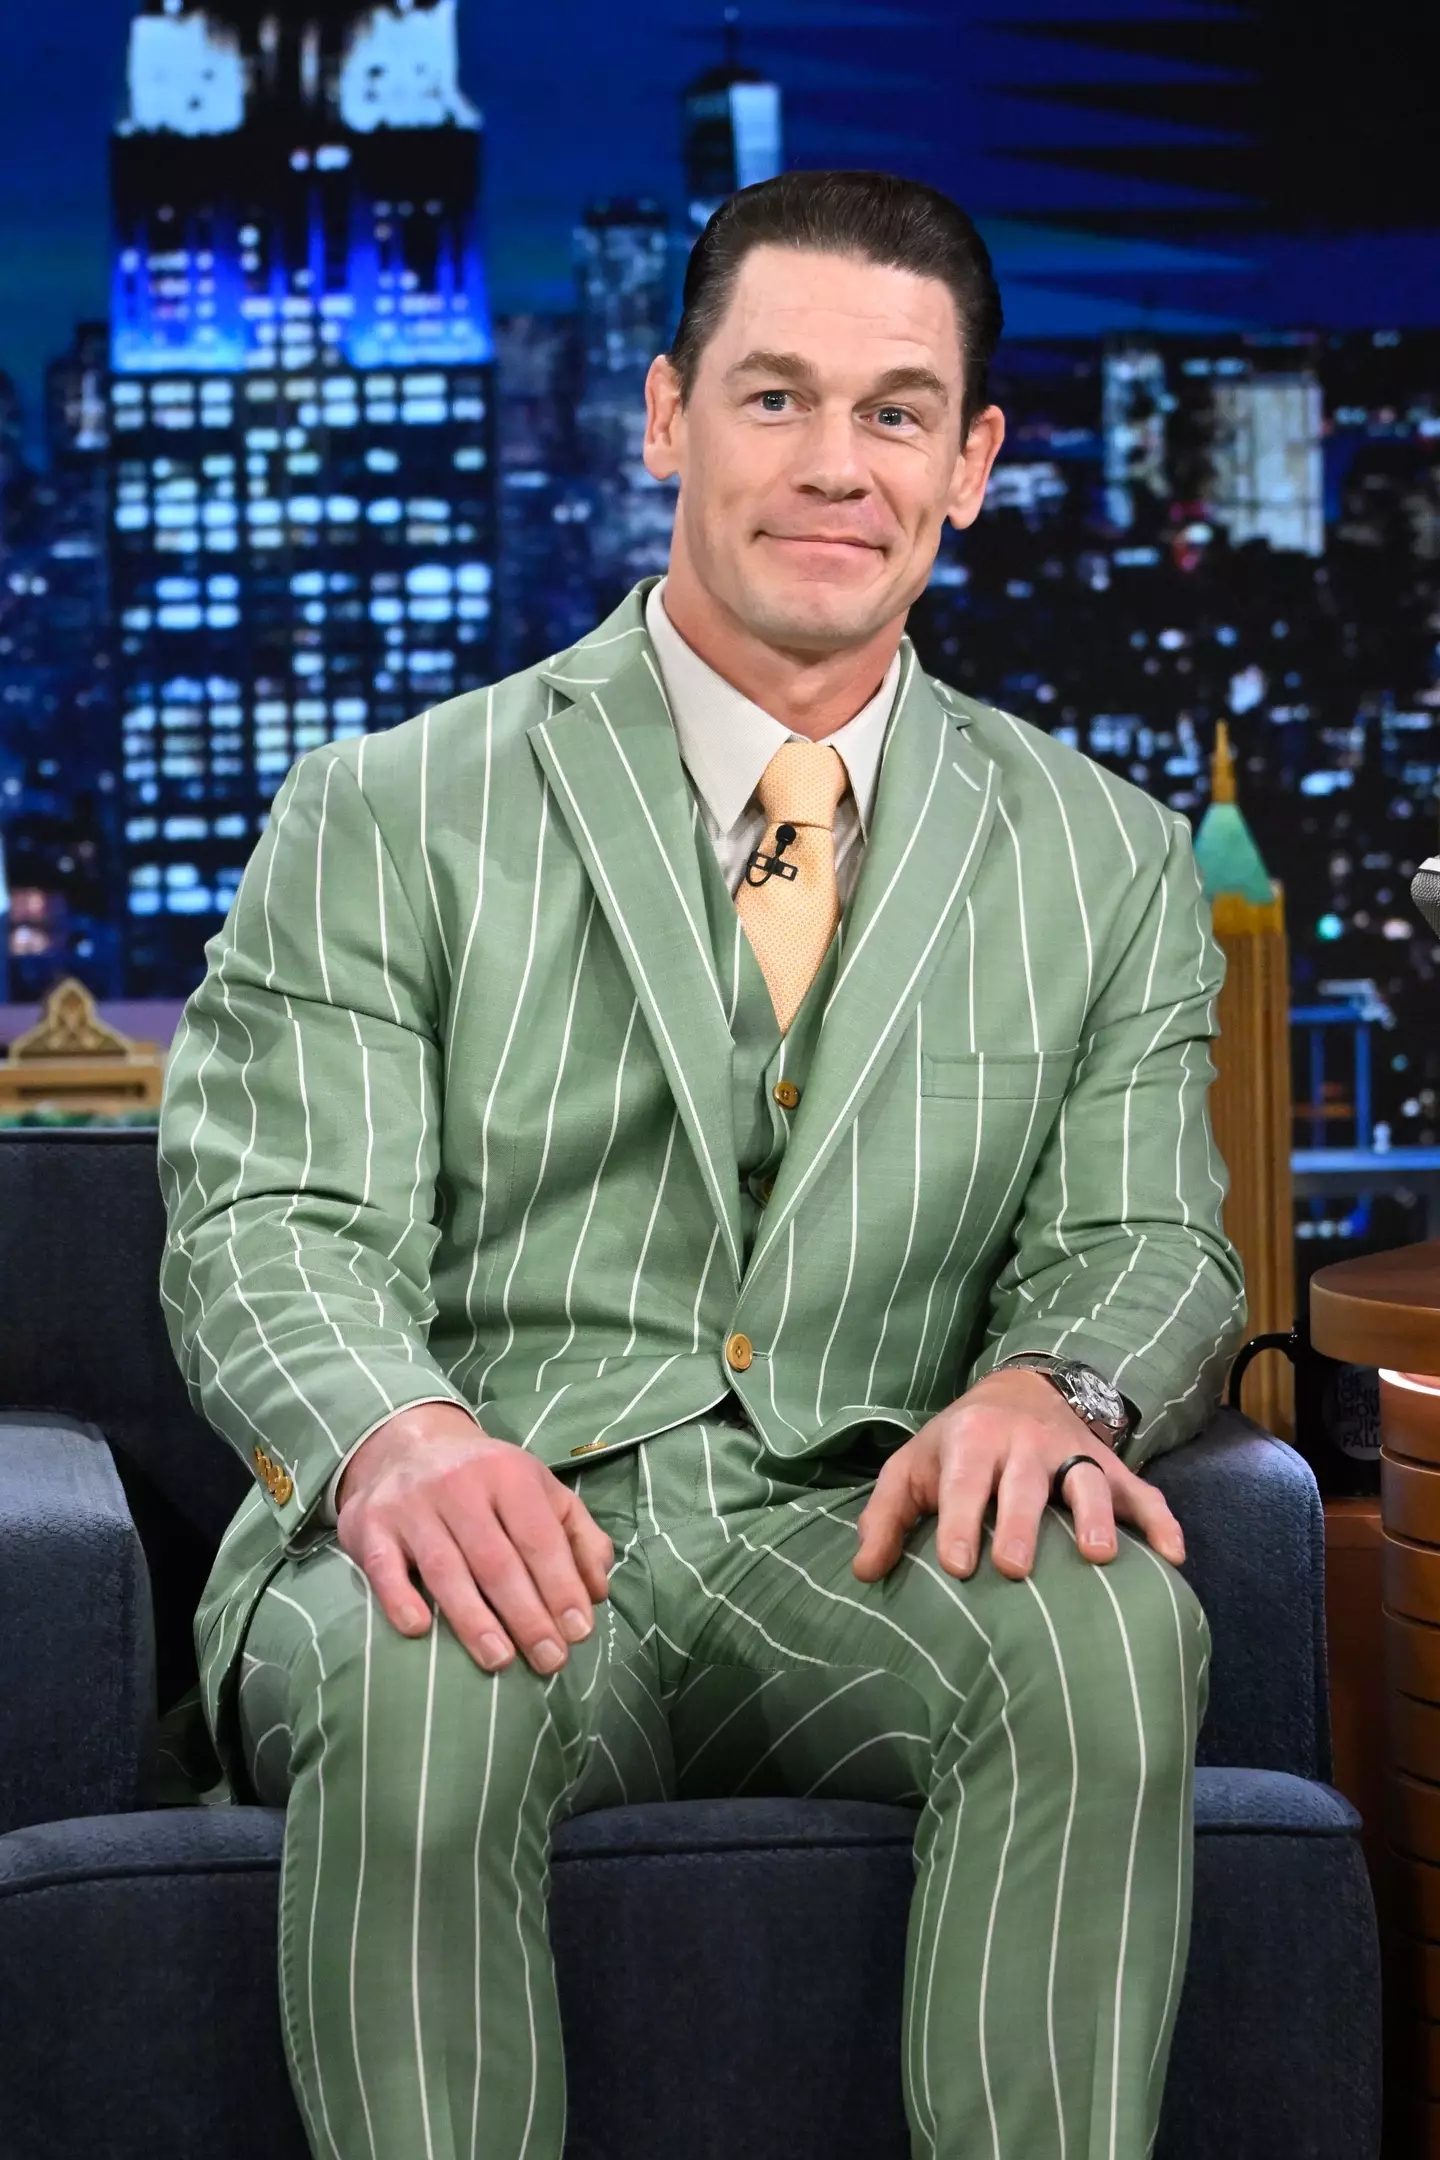 John Cena opened up about protecting his brother at school. (Todd Owyoung/NBC via Getty Images)